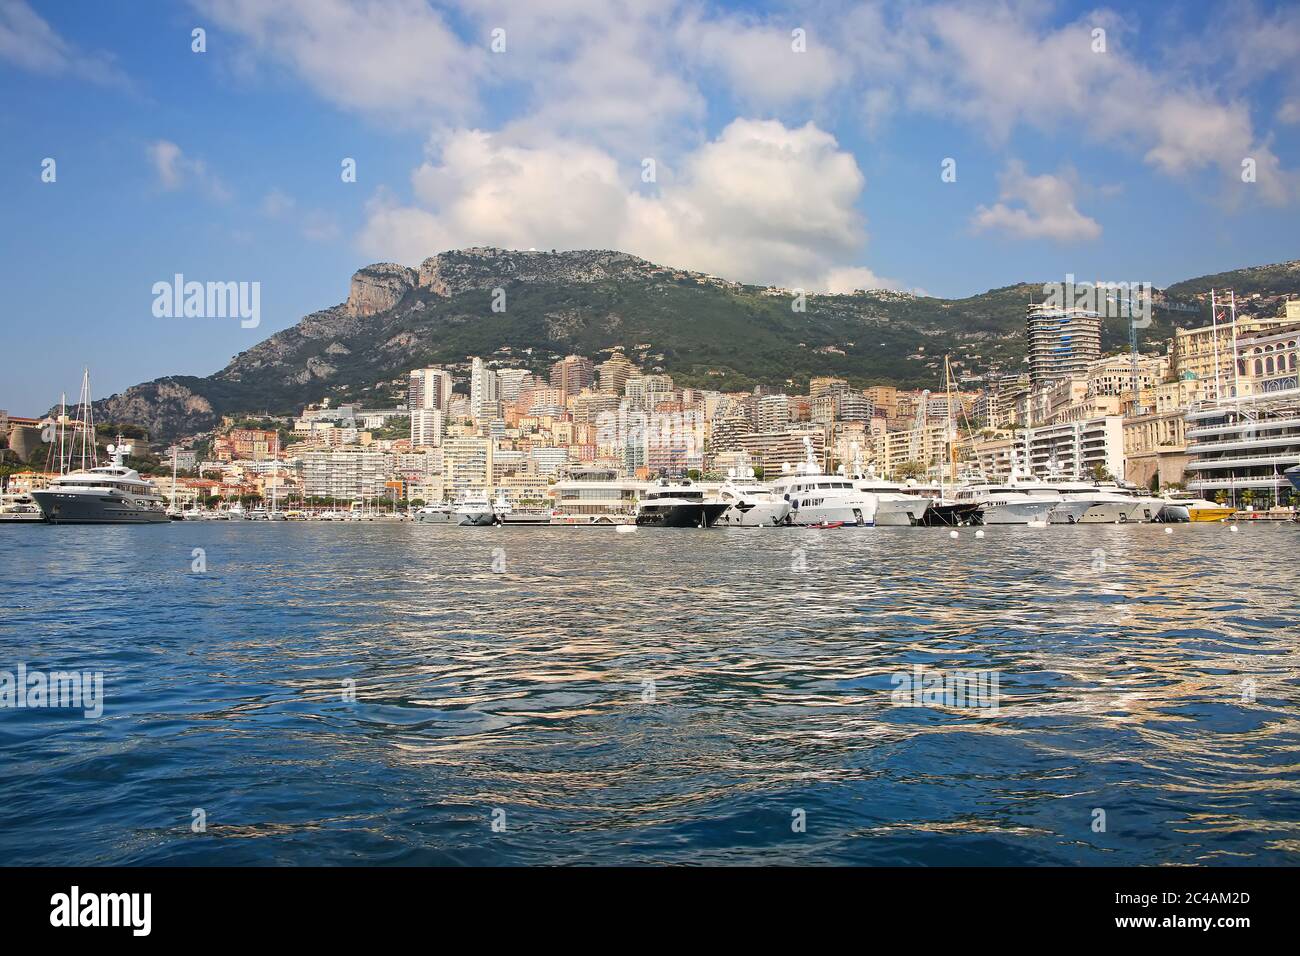 View from the Mediterranean sea of the Principality of Monaco, and Monte Carlo, with dense skyscrapers , marina, yachts, palace & casino. Stock Photo